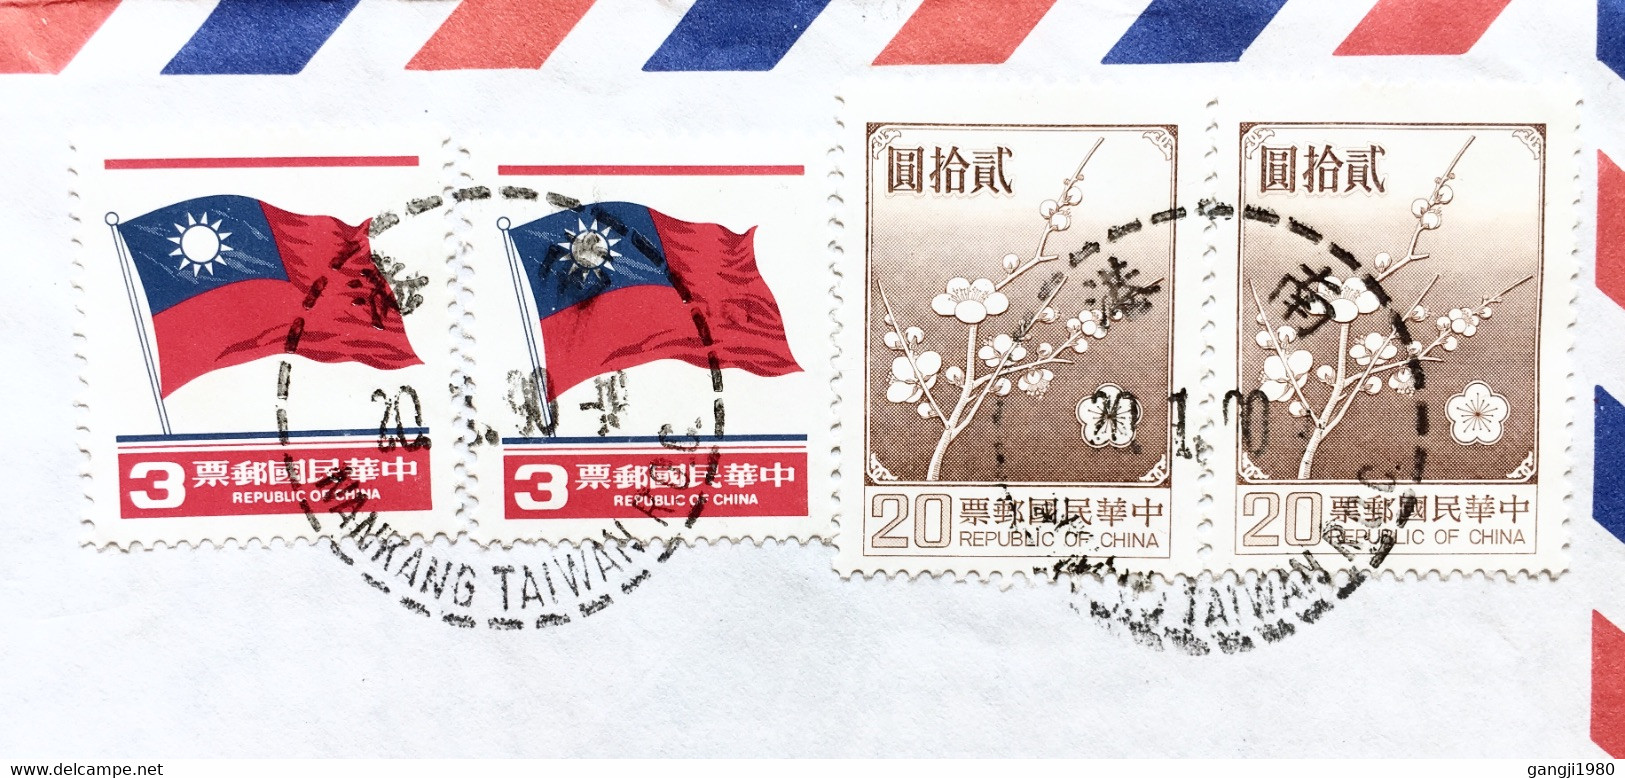 CHINA TAIWAN TO USA 1990, USED COVER, VIGNETTE EXPRESS “AIRMAIL” LABEL, NANKANG CITY CANCELLATION, FLAG, FLOWER, PLANT. - Lettres & Documents